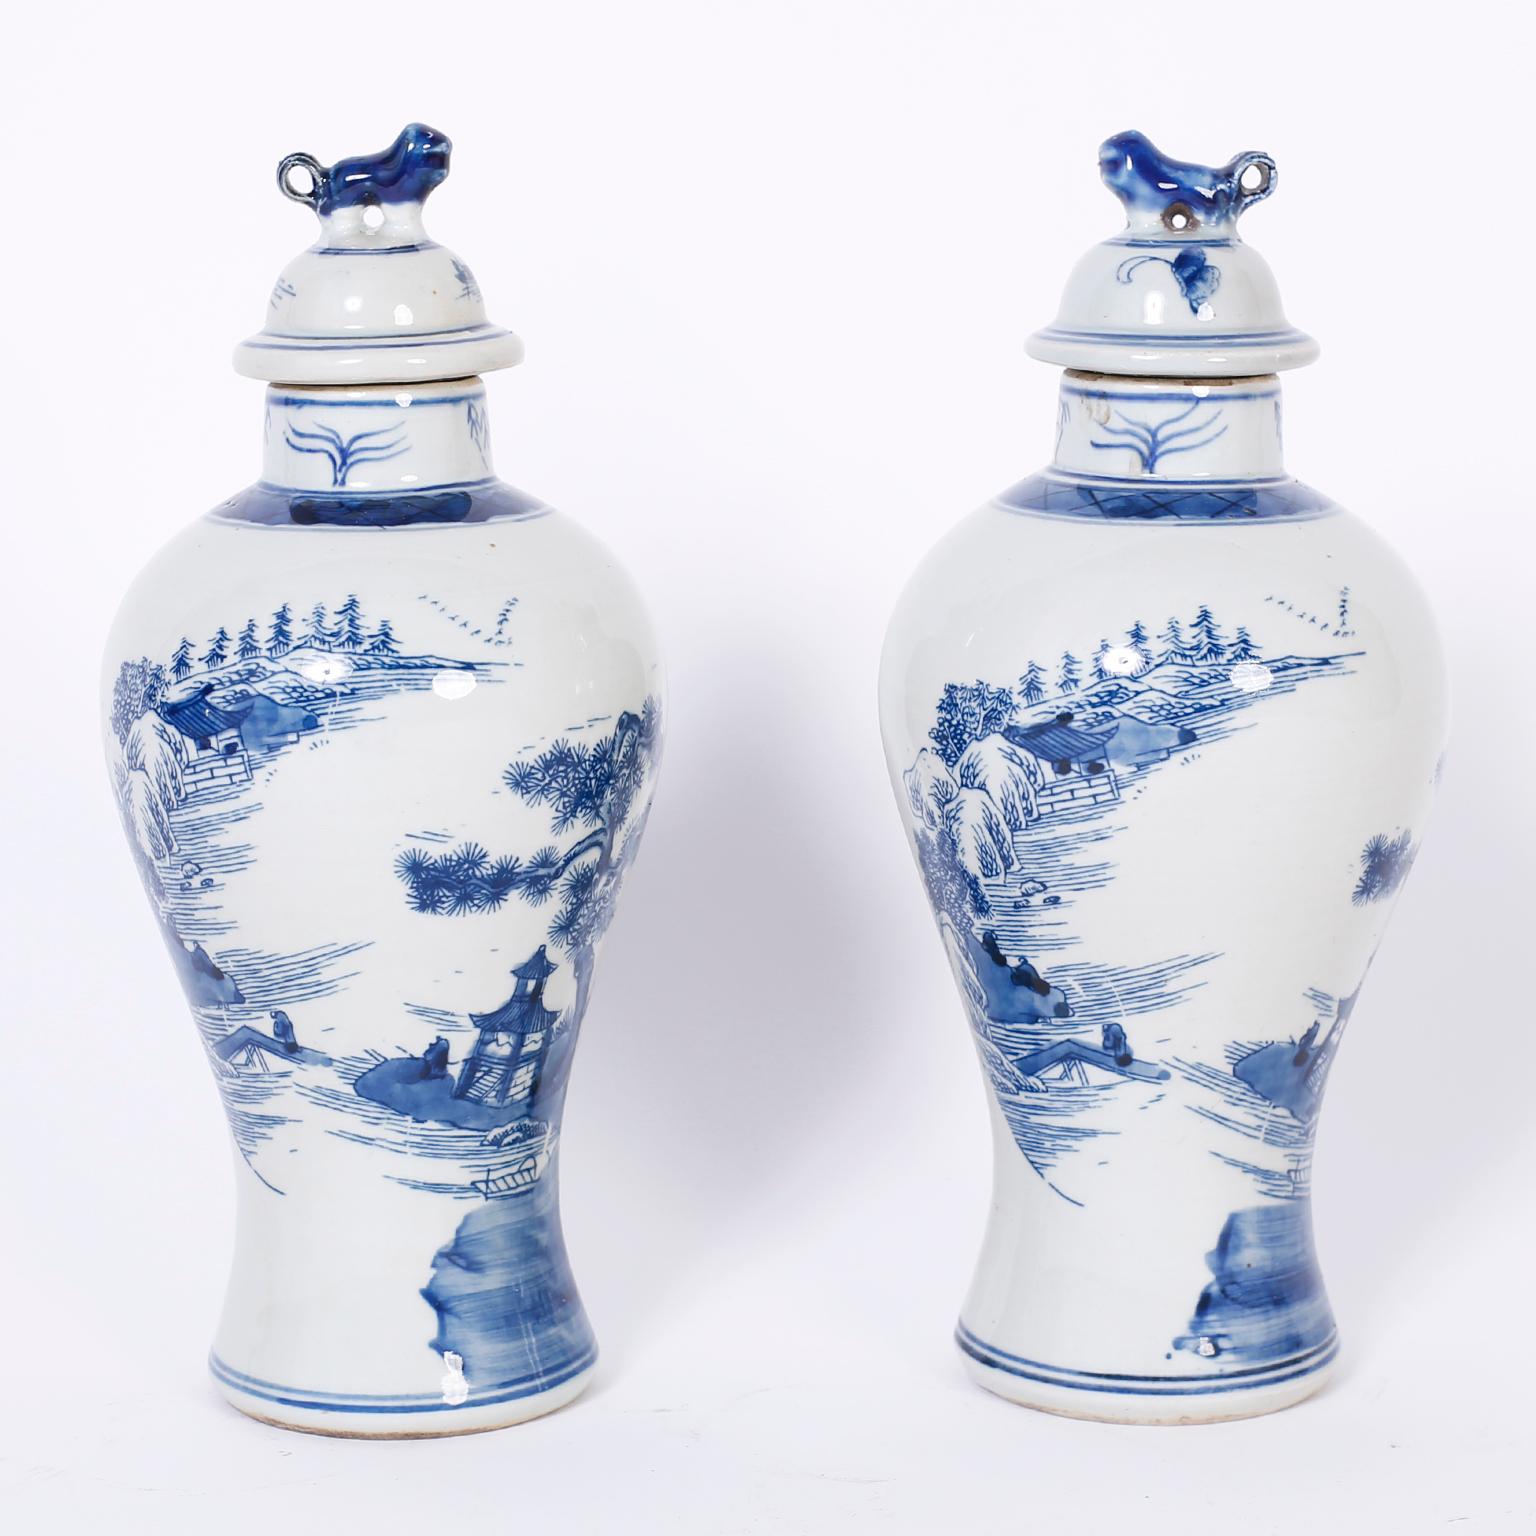 Chinoiserie Pair of Blue and White Porcelain Lidded Jars